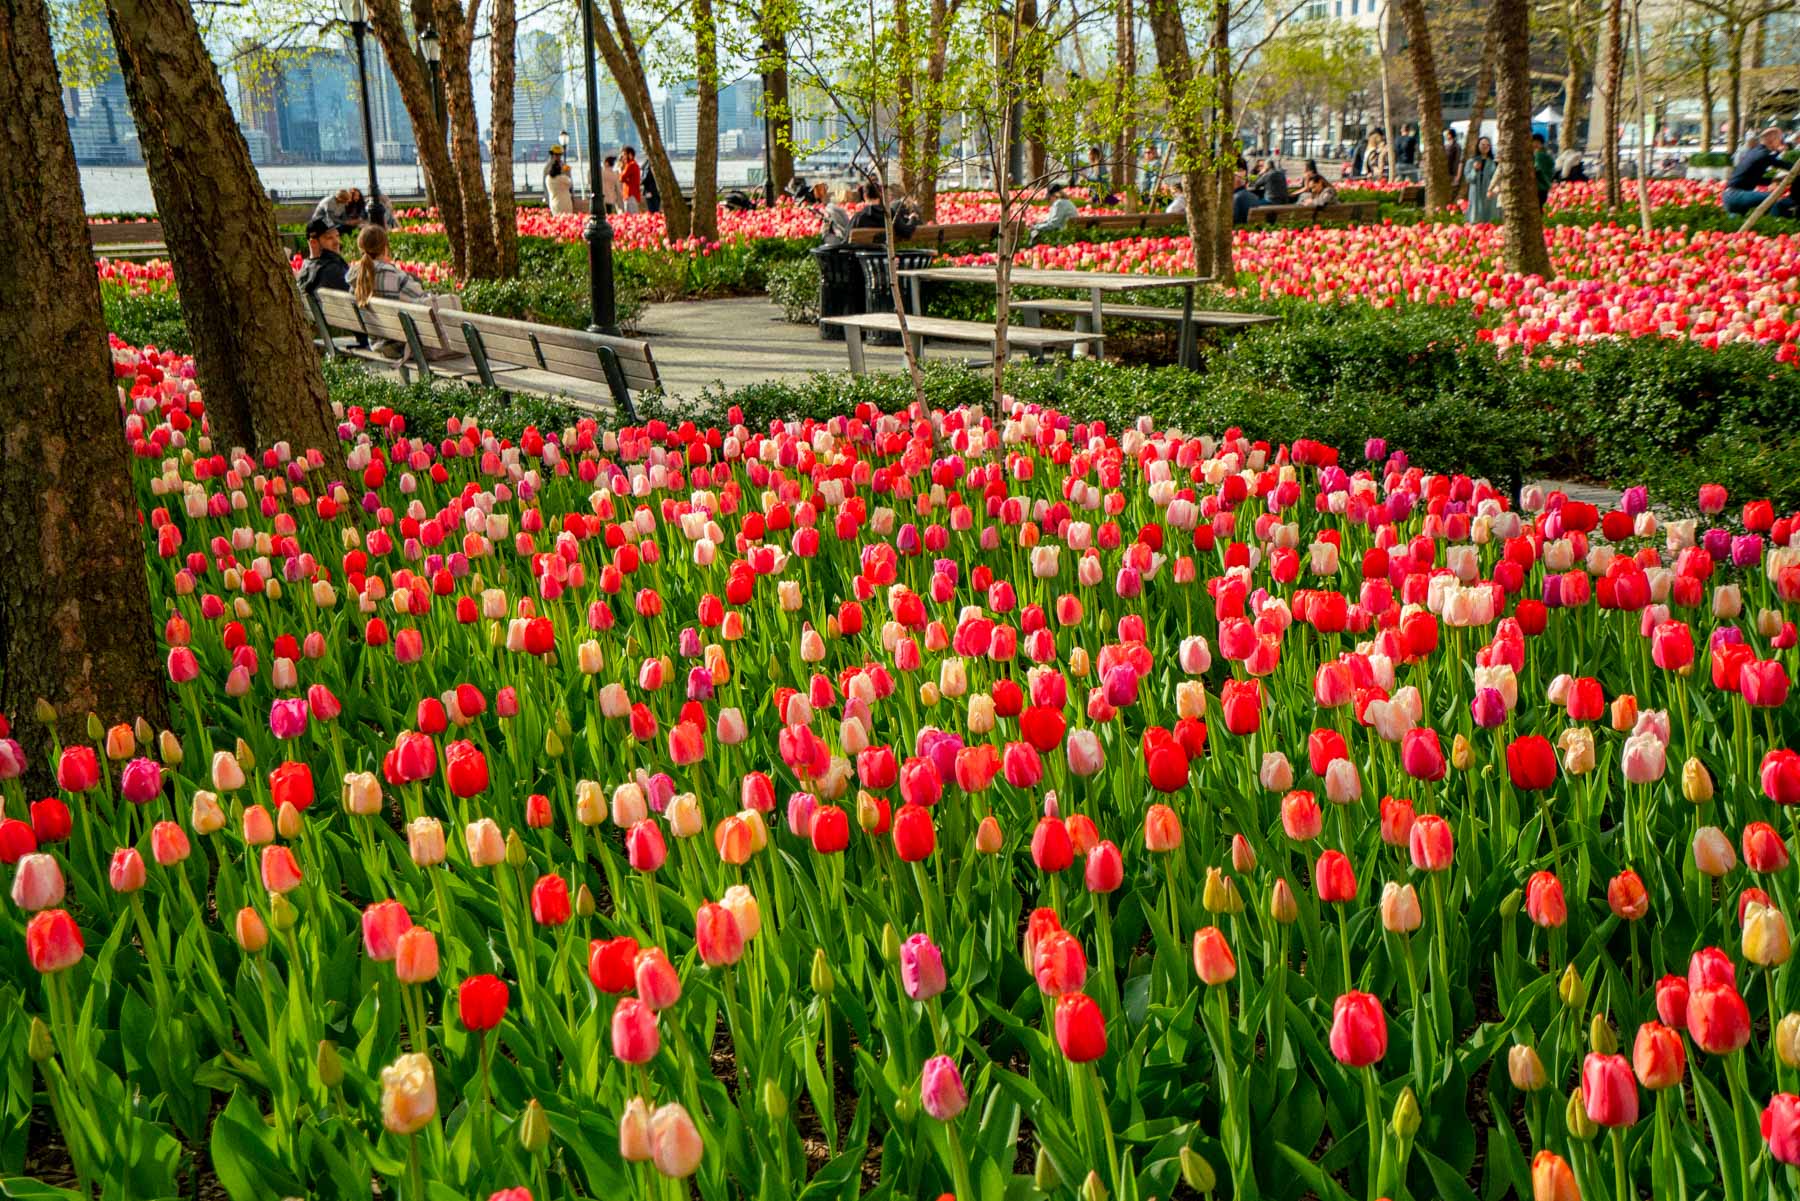 Where to find tulips in New York City